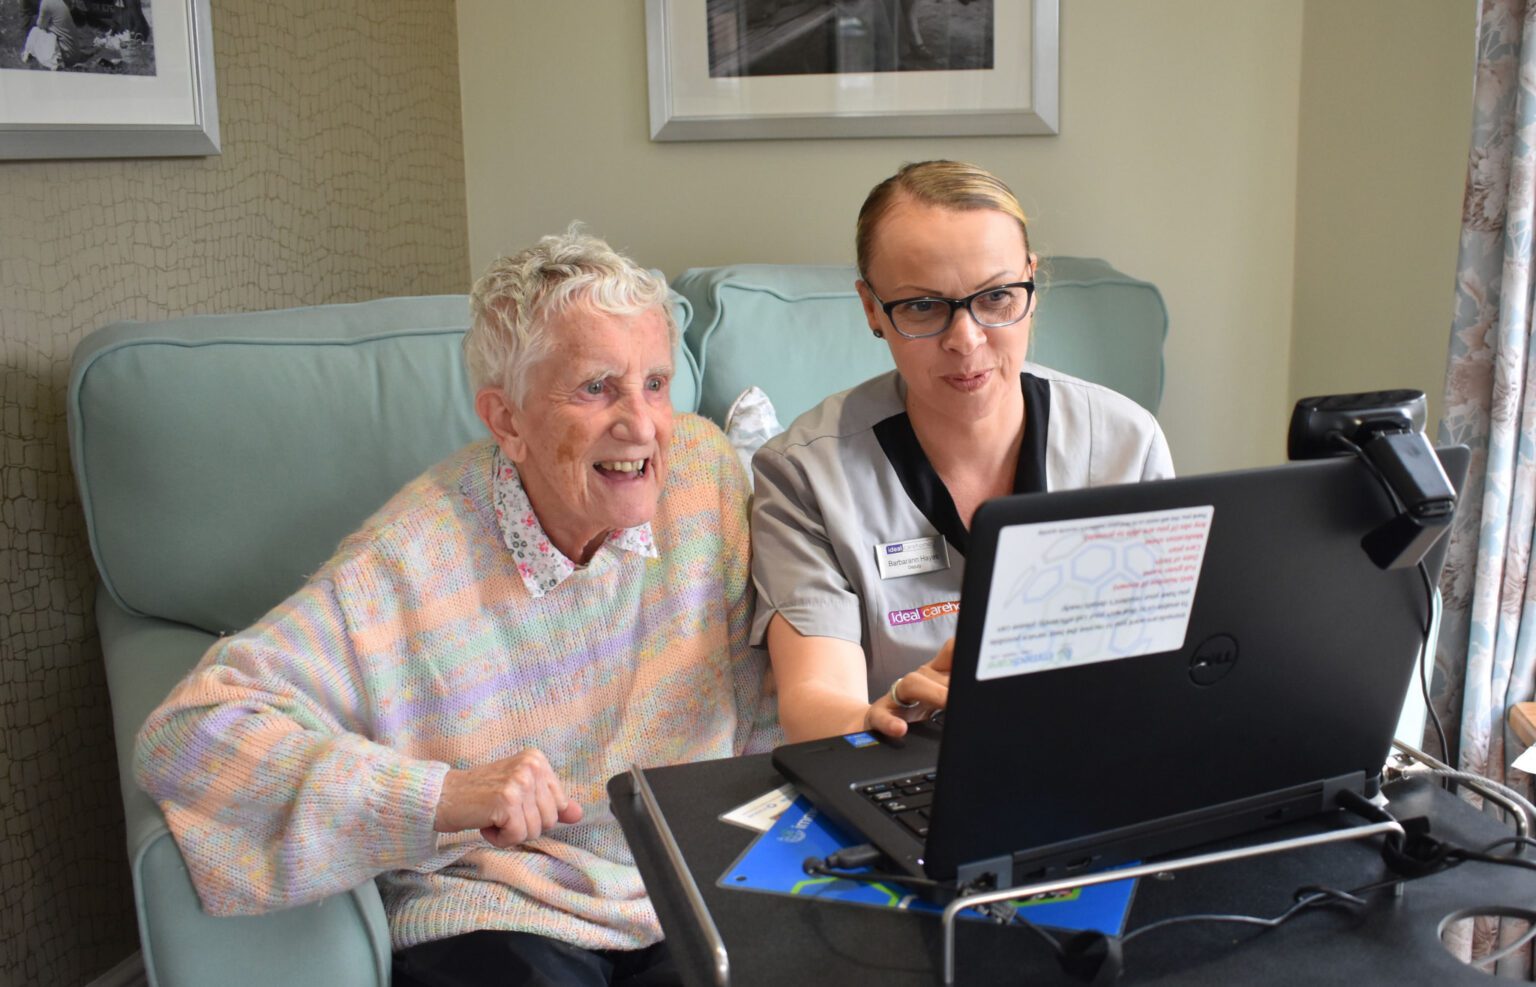 Expanding telemedicine for dementia patients could save NHS billions and support frontline resource strains, new data shows